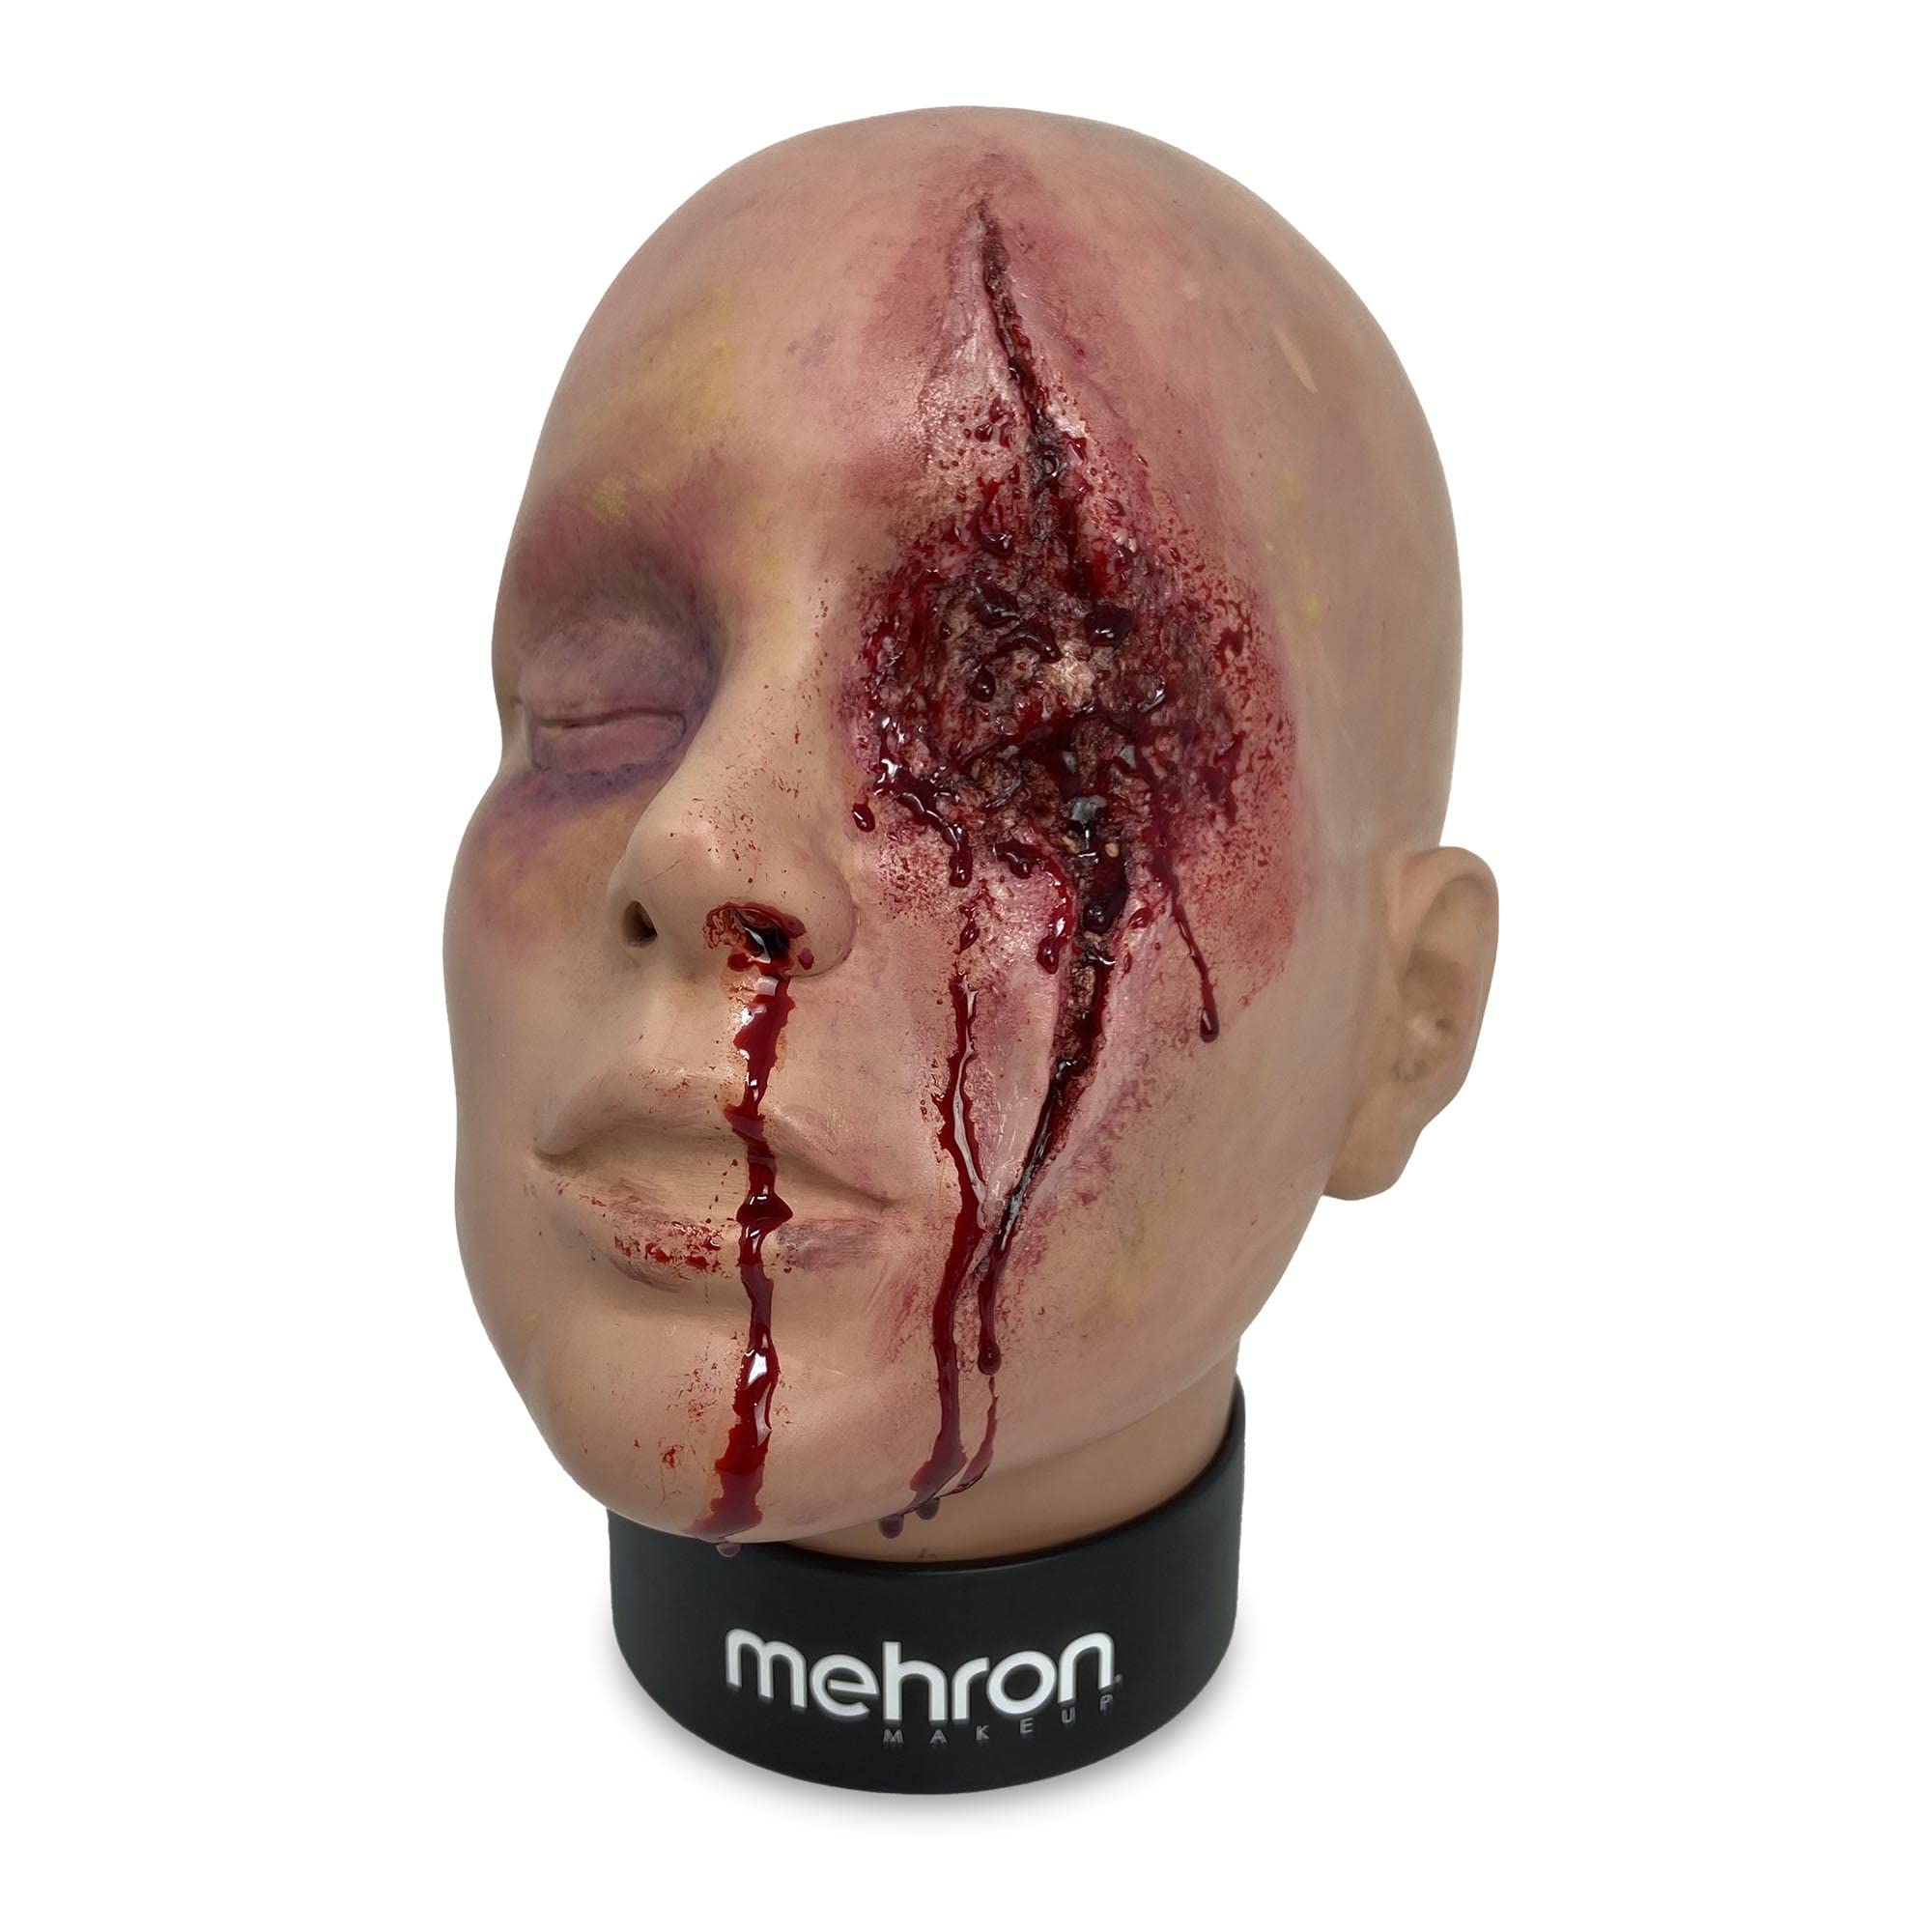 Mehron Makeup Practice Head |Makeup Practice Face| Mannequin Head for Makeup Practice, Special FX, & Face Painting for Students